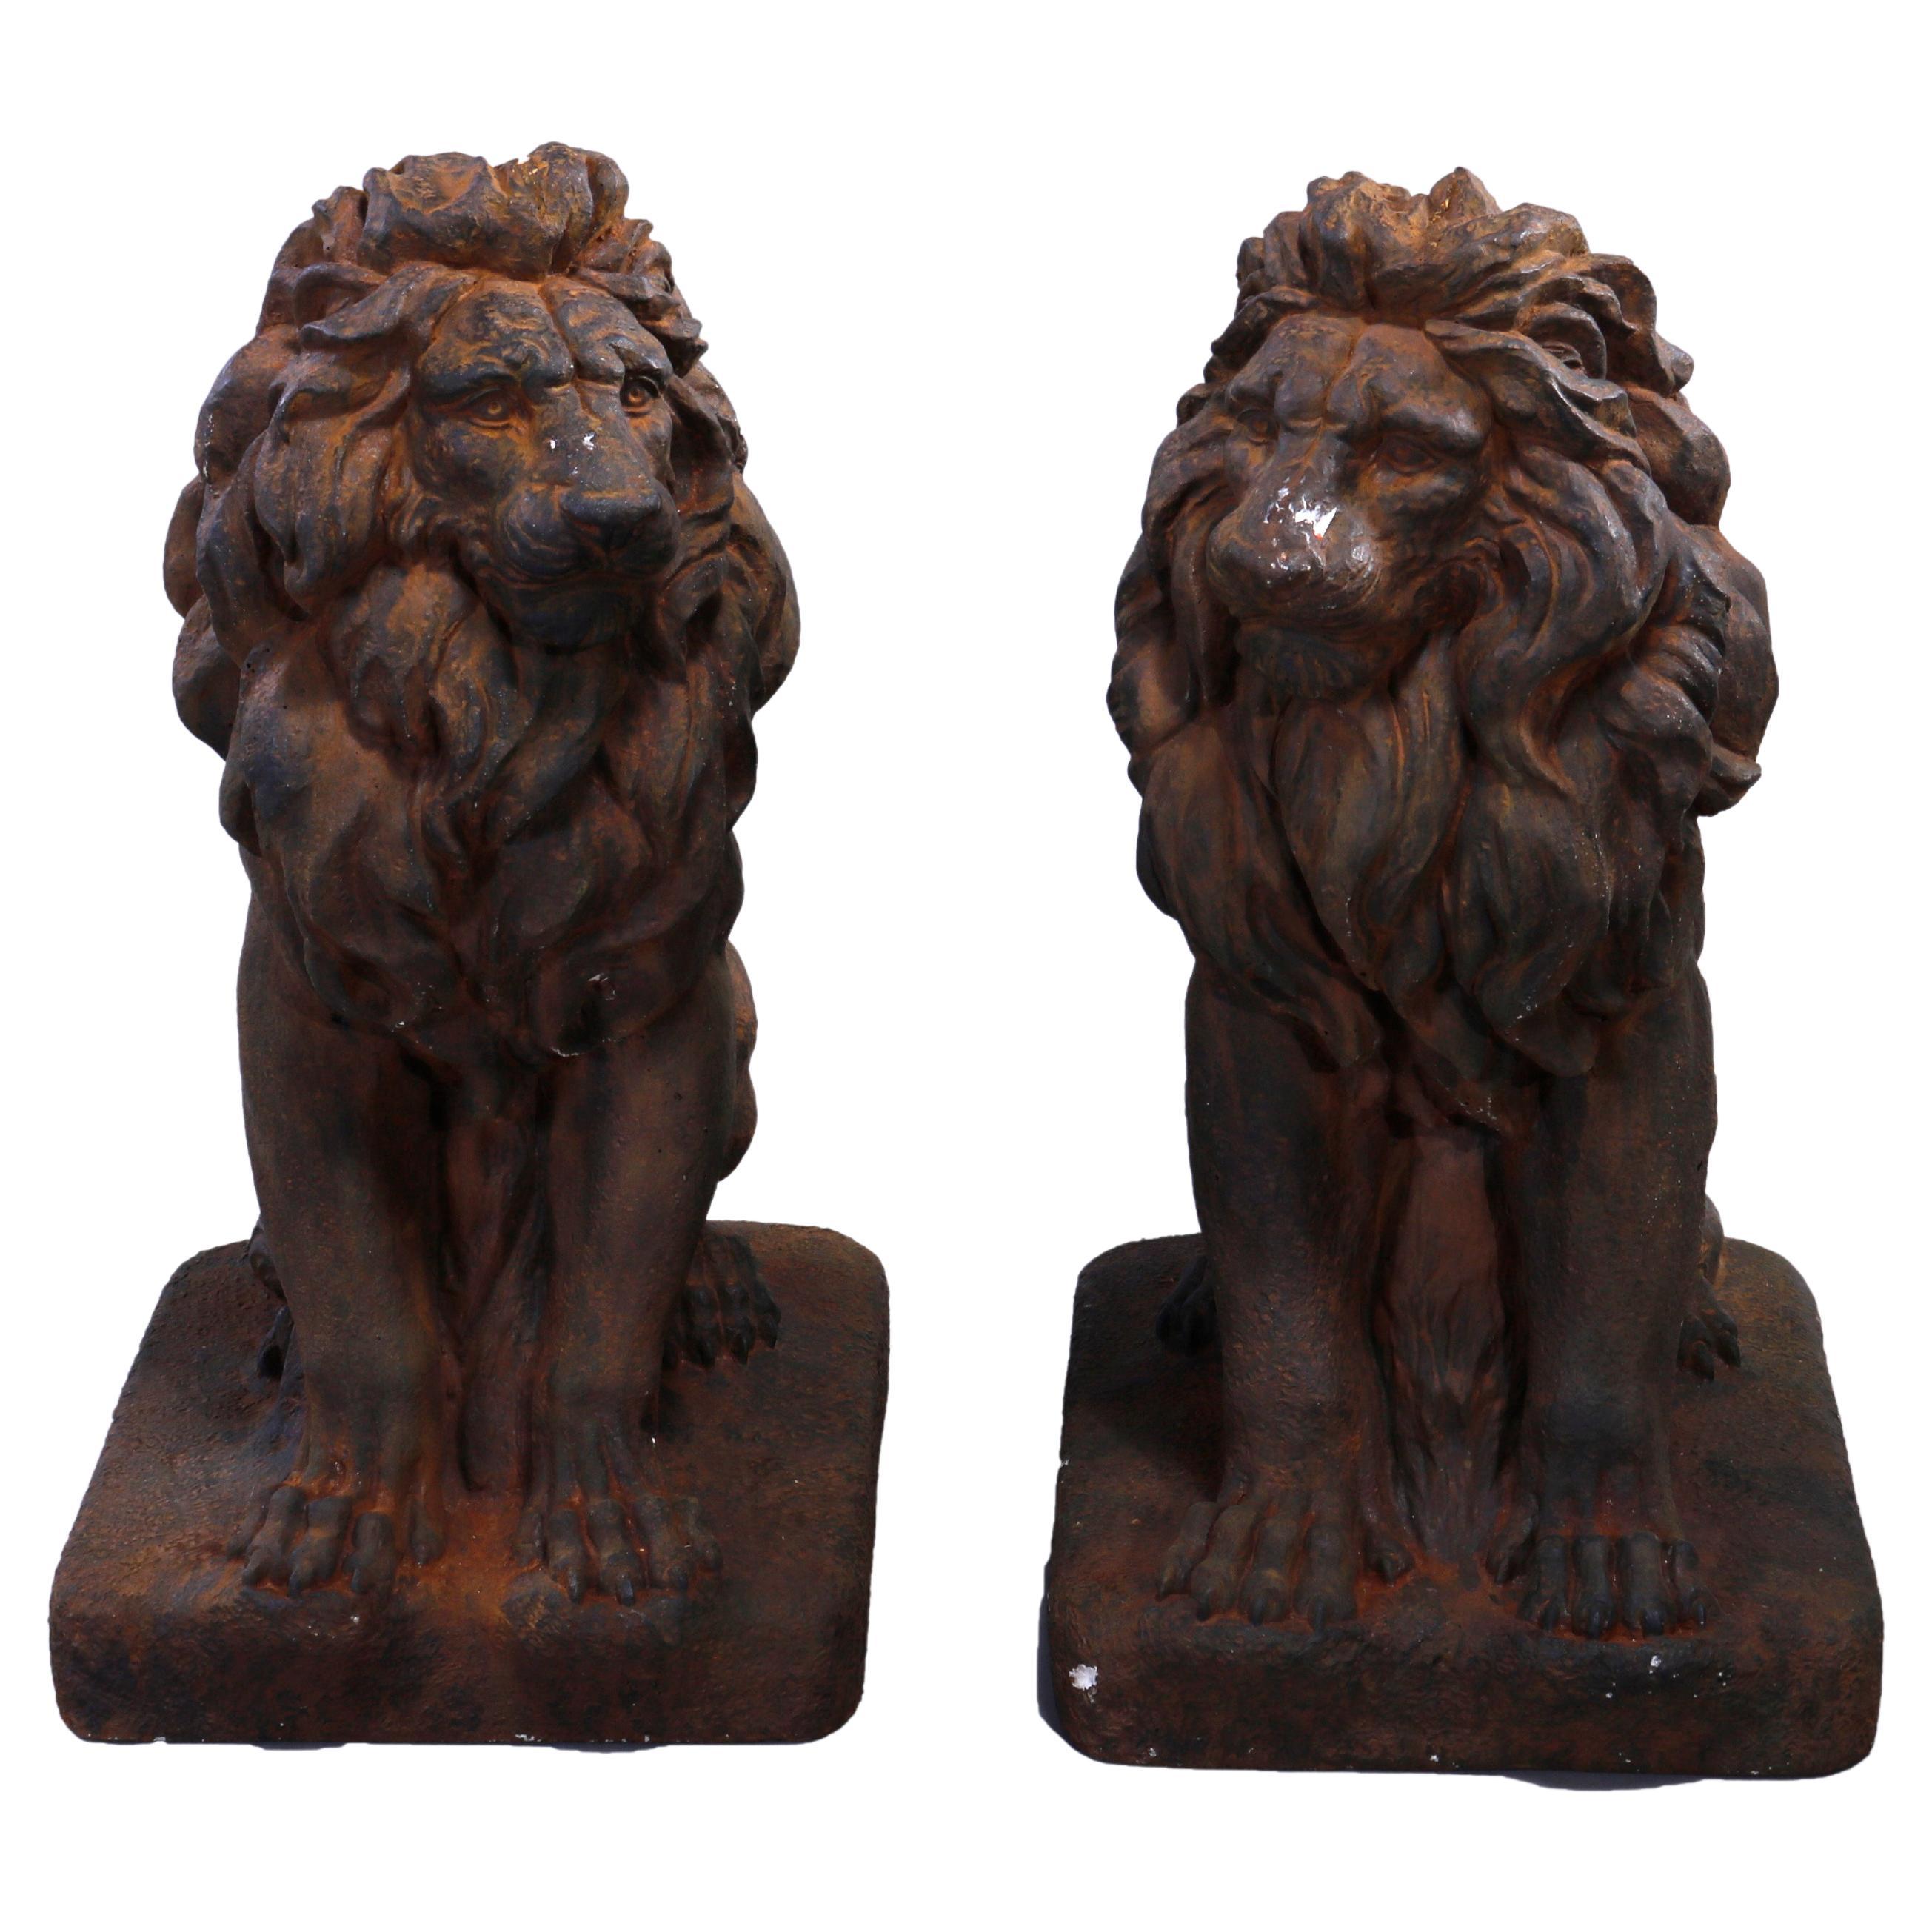 Cast Hard Stone Classical Seated Lion Garden Statues in Bronzed Finish, 20th C